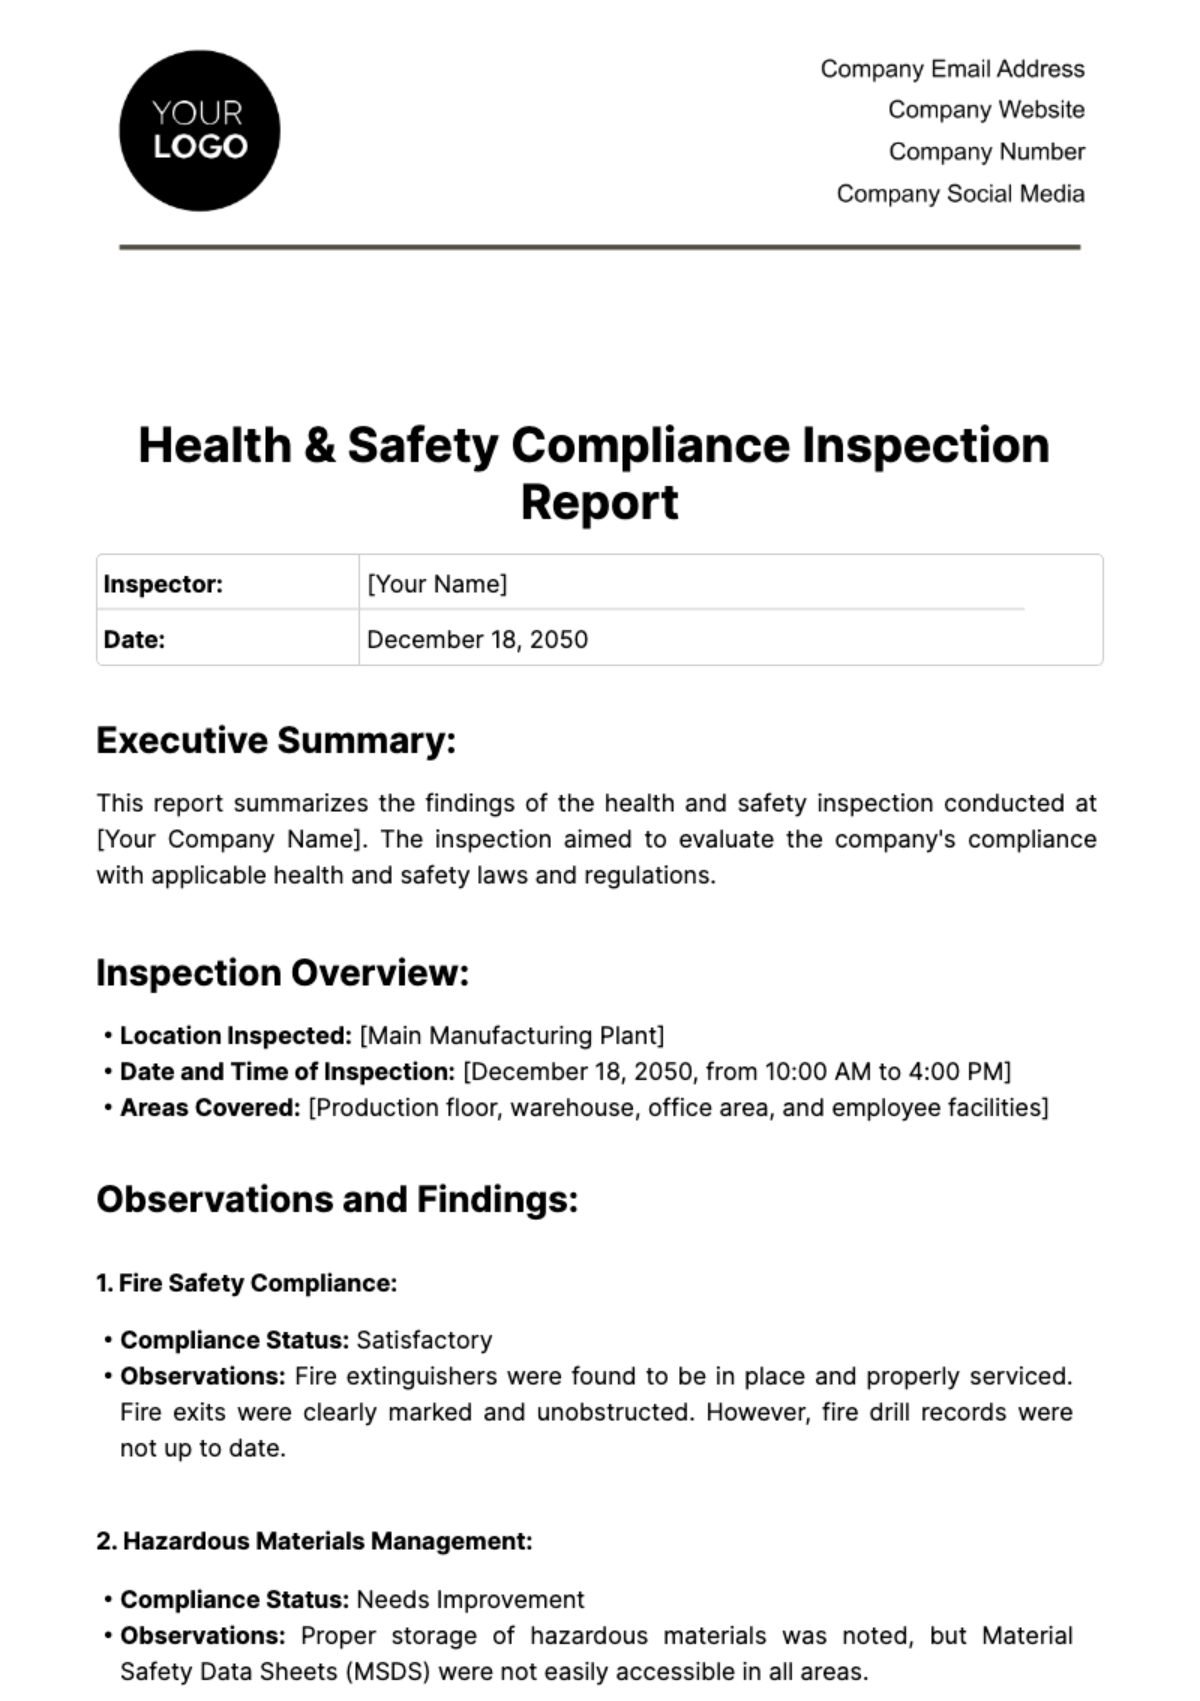 Health & Safety Compliance Inspection Report Template